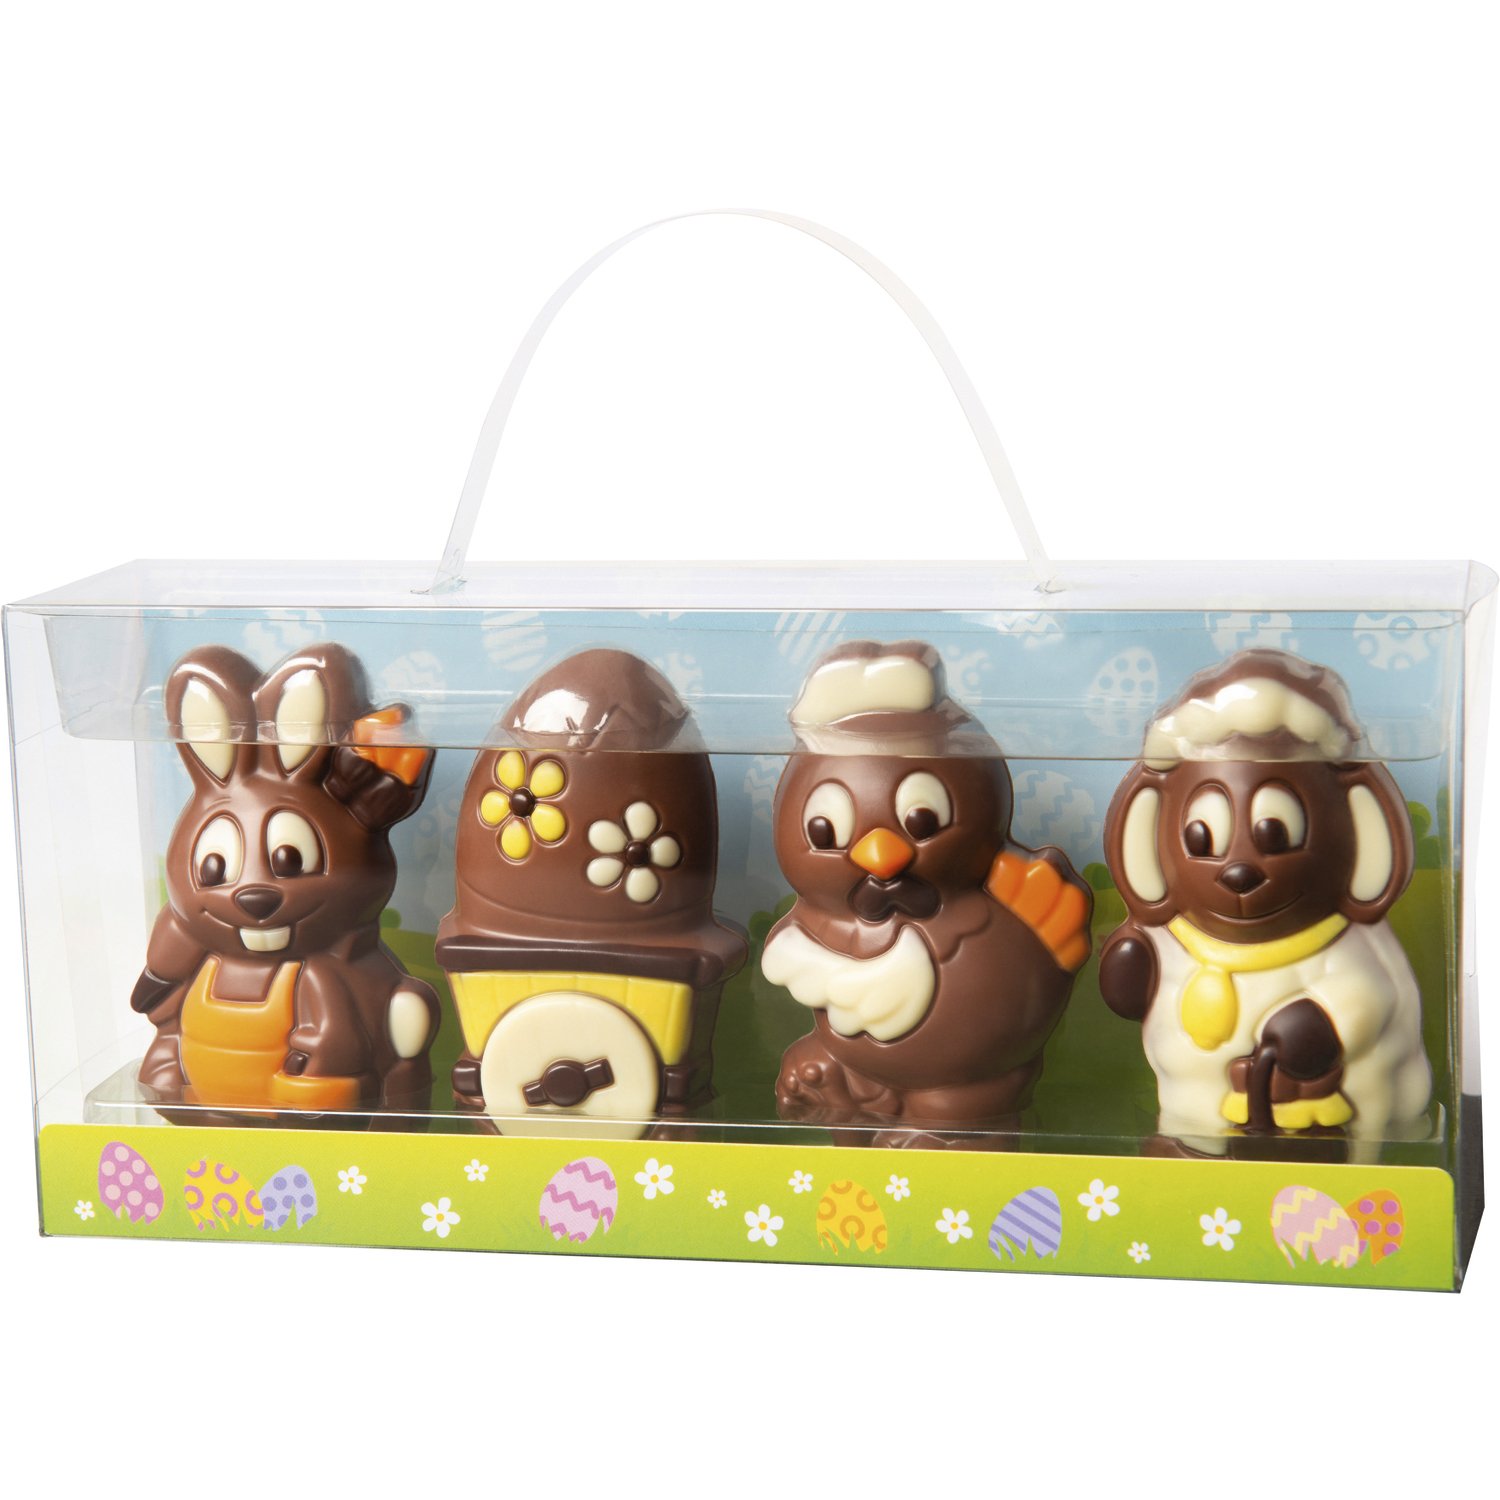 Decorated milk choc Easter figures in gift box - 204mm long - 6x120g